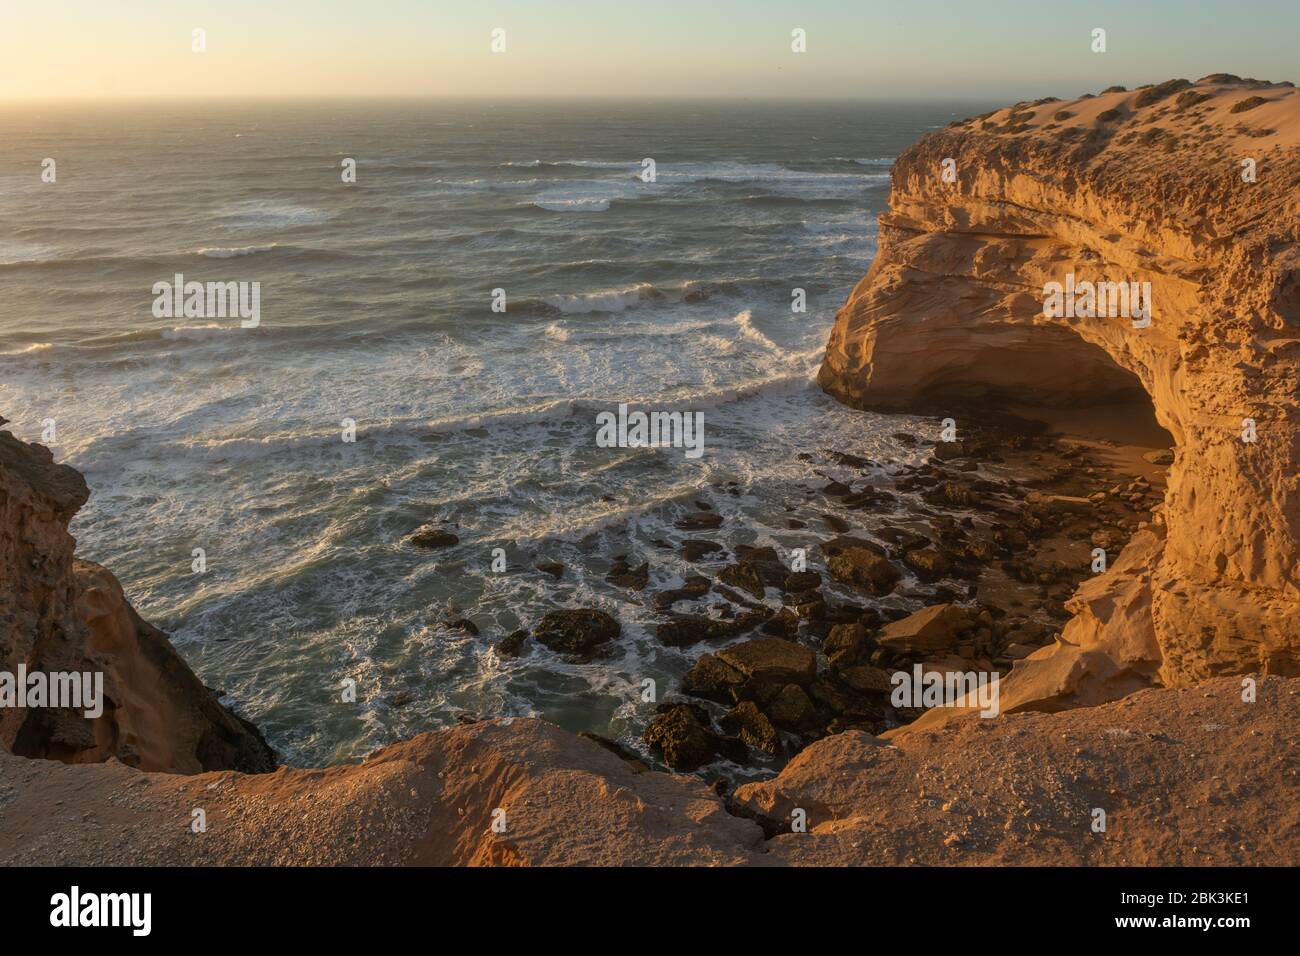 Rock formation on the atlantic coast in southern Morocco Stock Photo